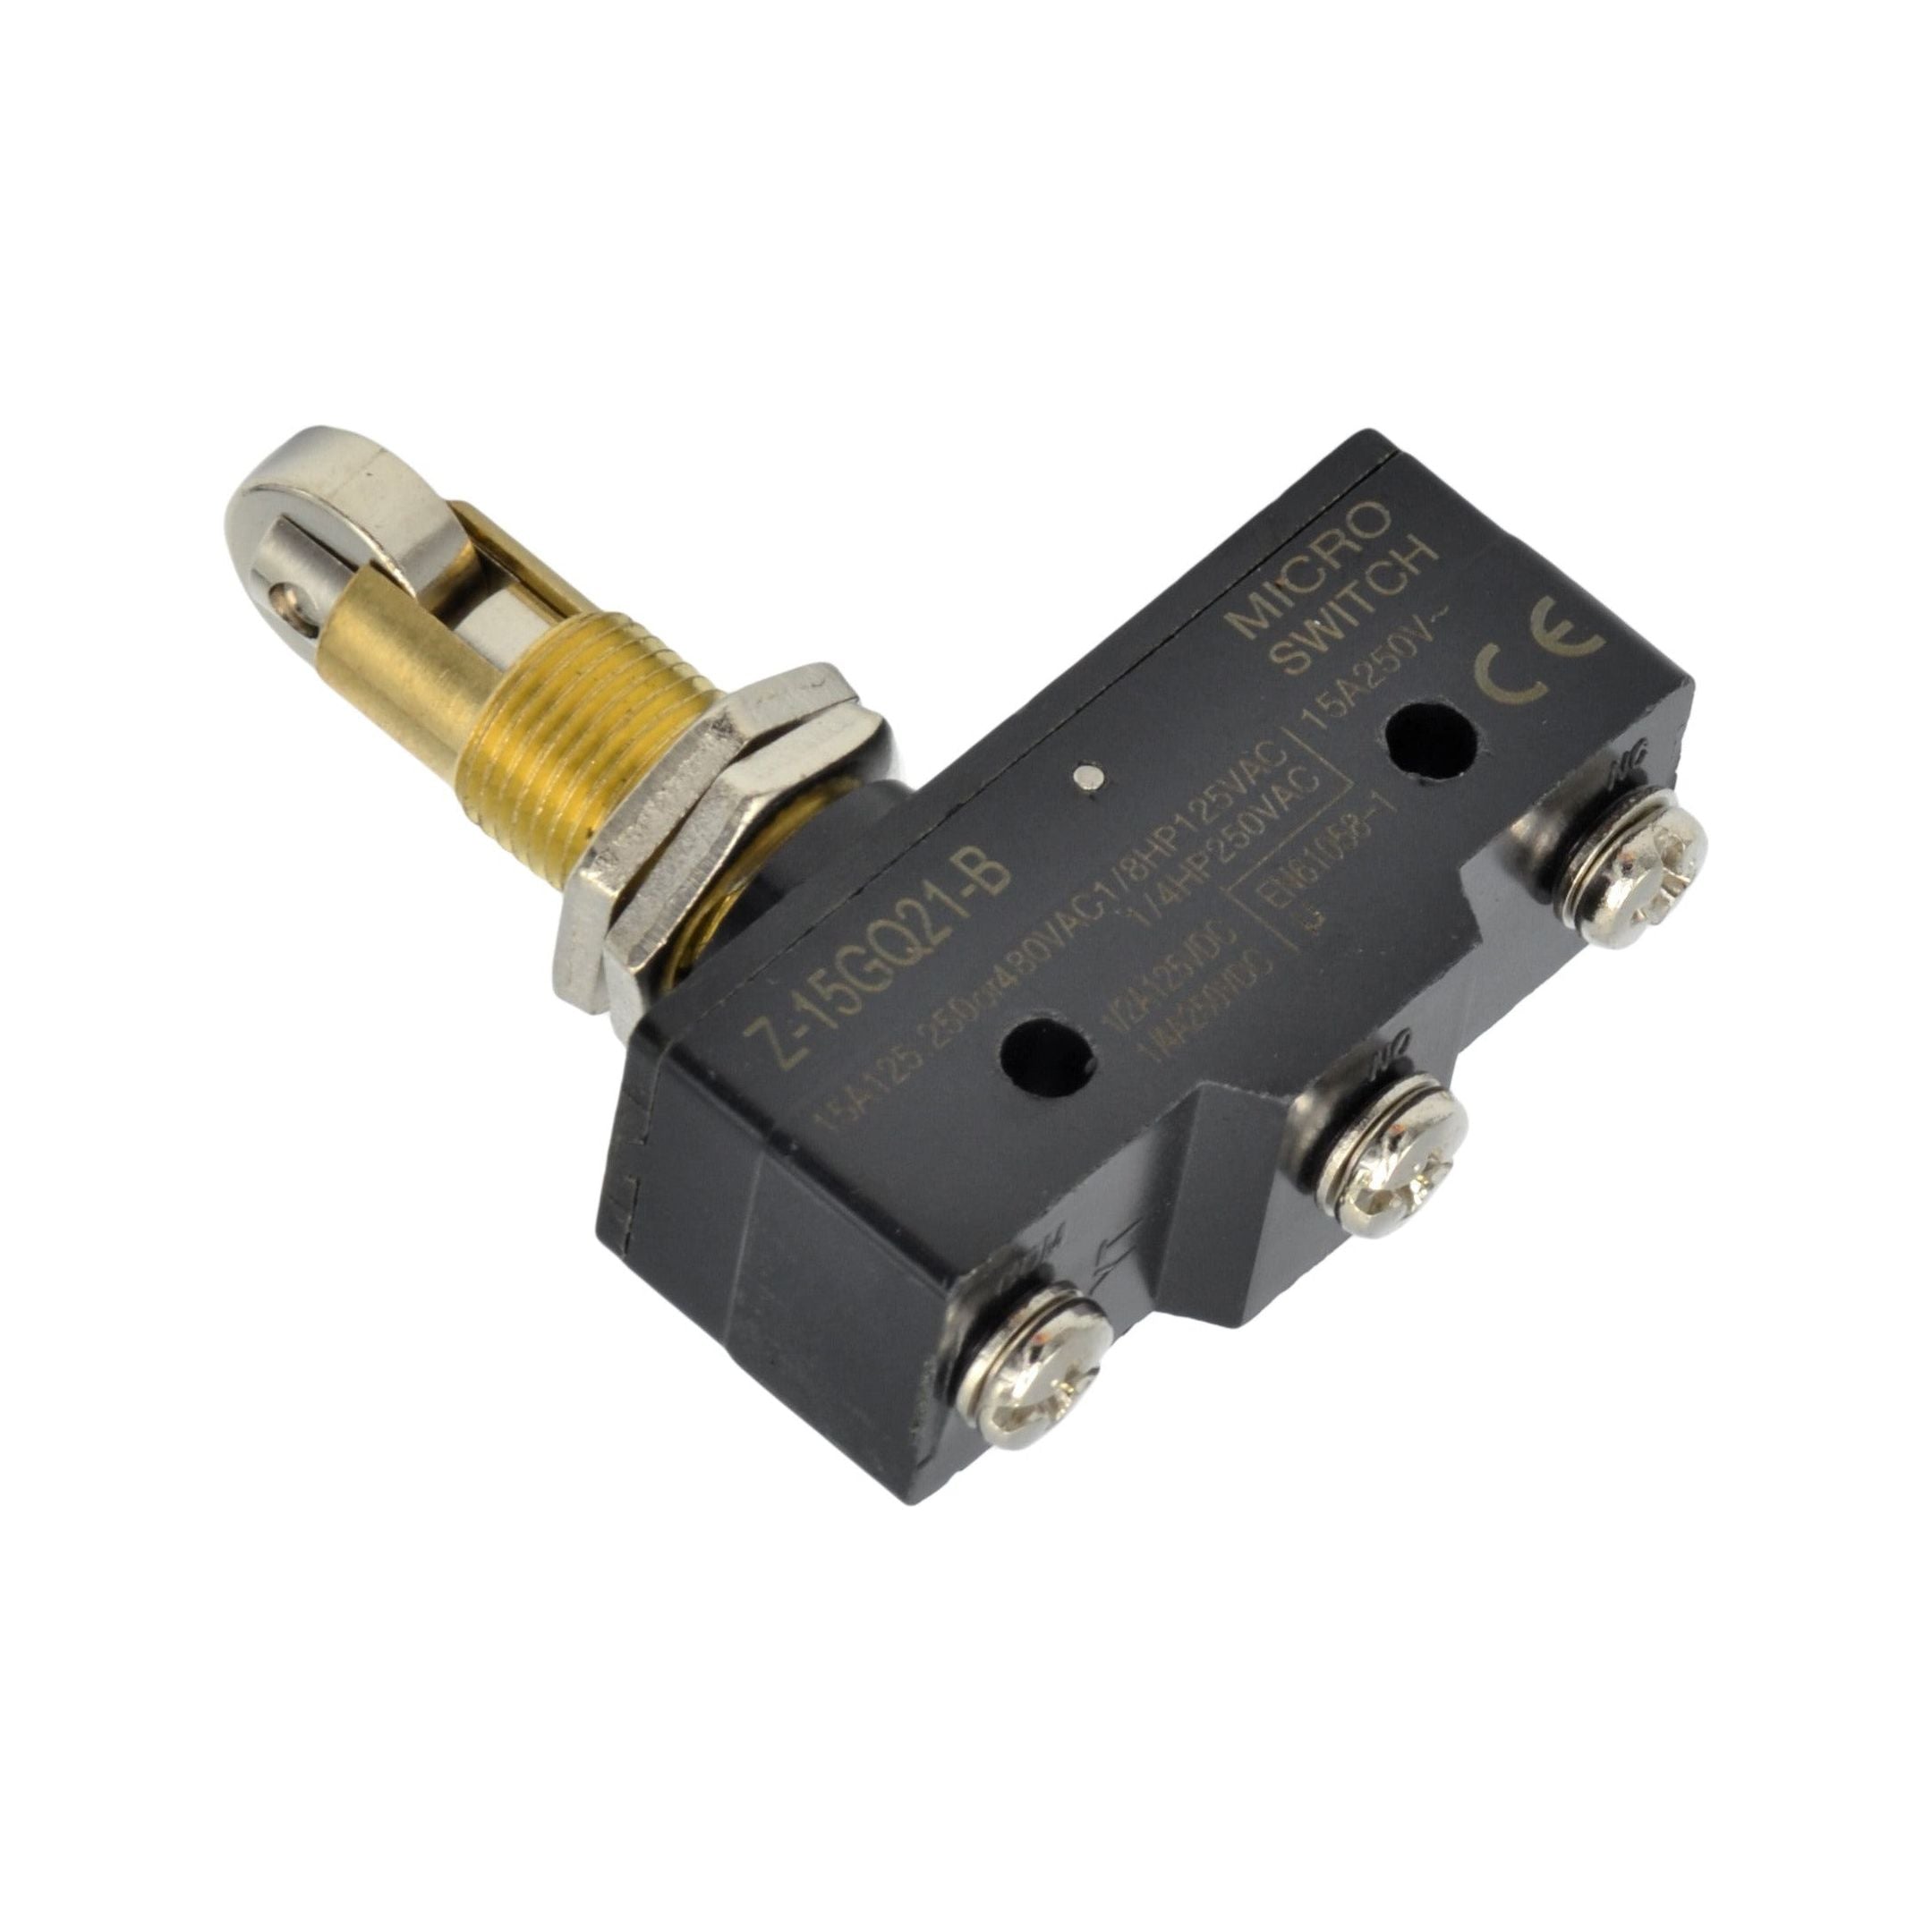 Z-15GQ21-B Panel-Mount Cross Roller Plunger Micro Limit Switch